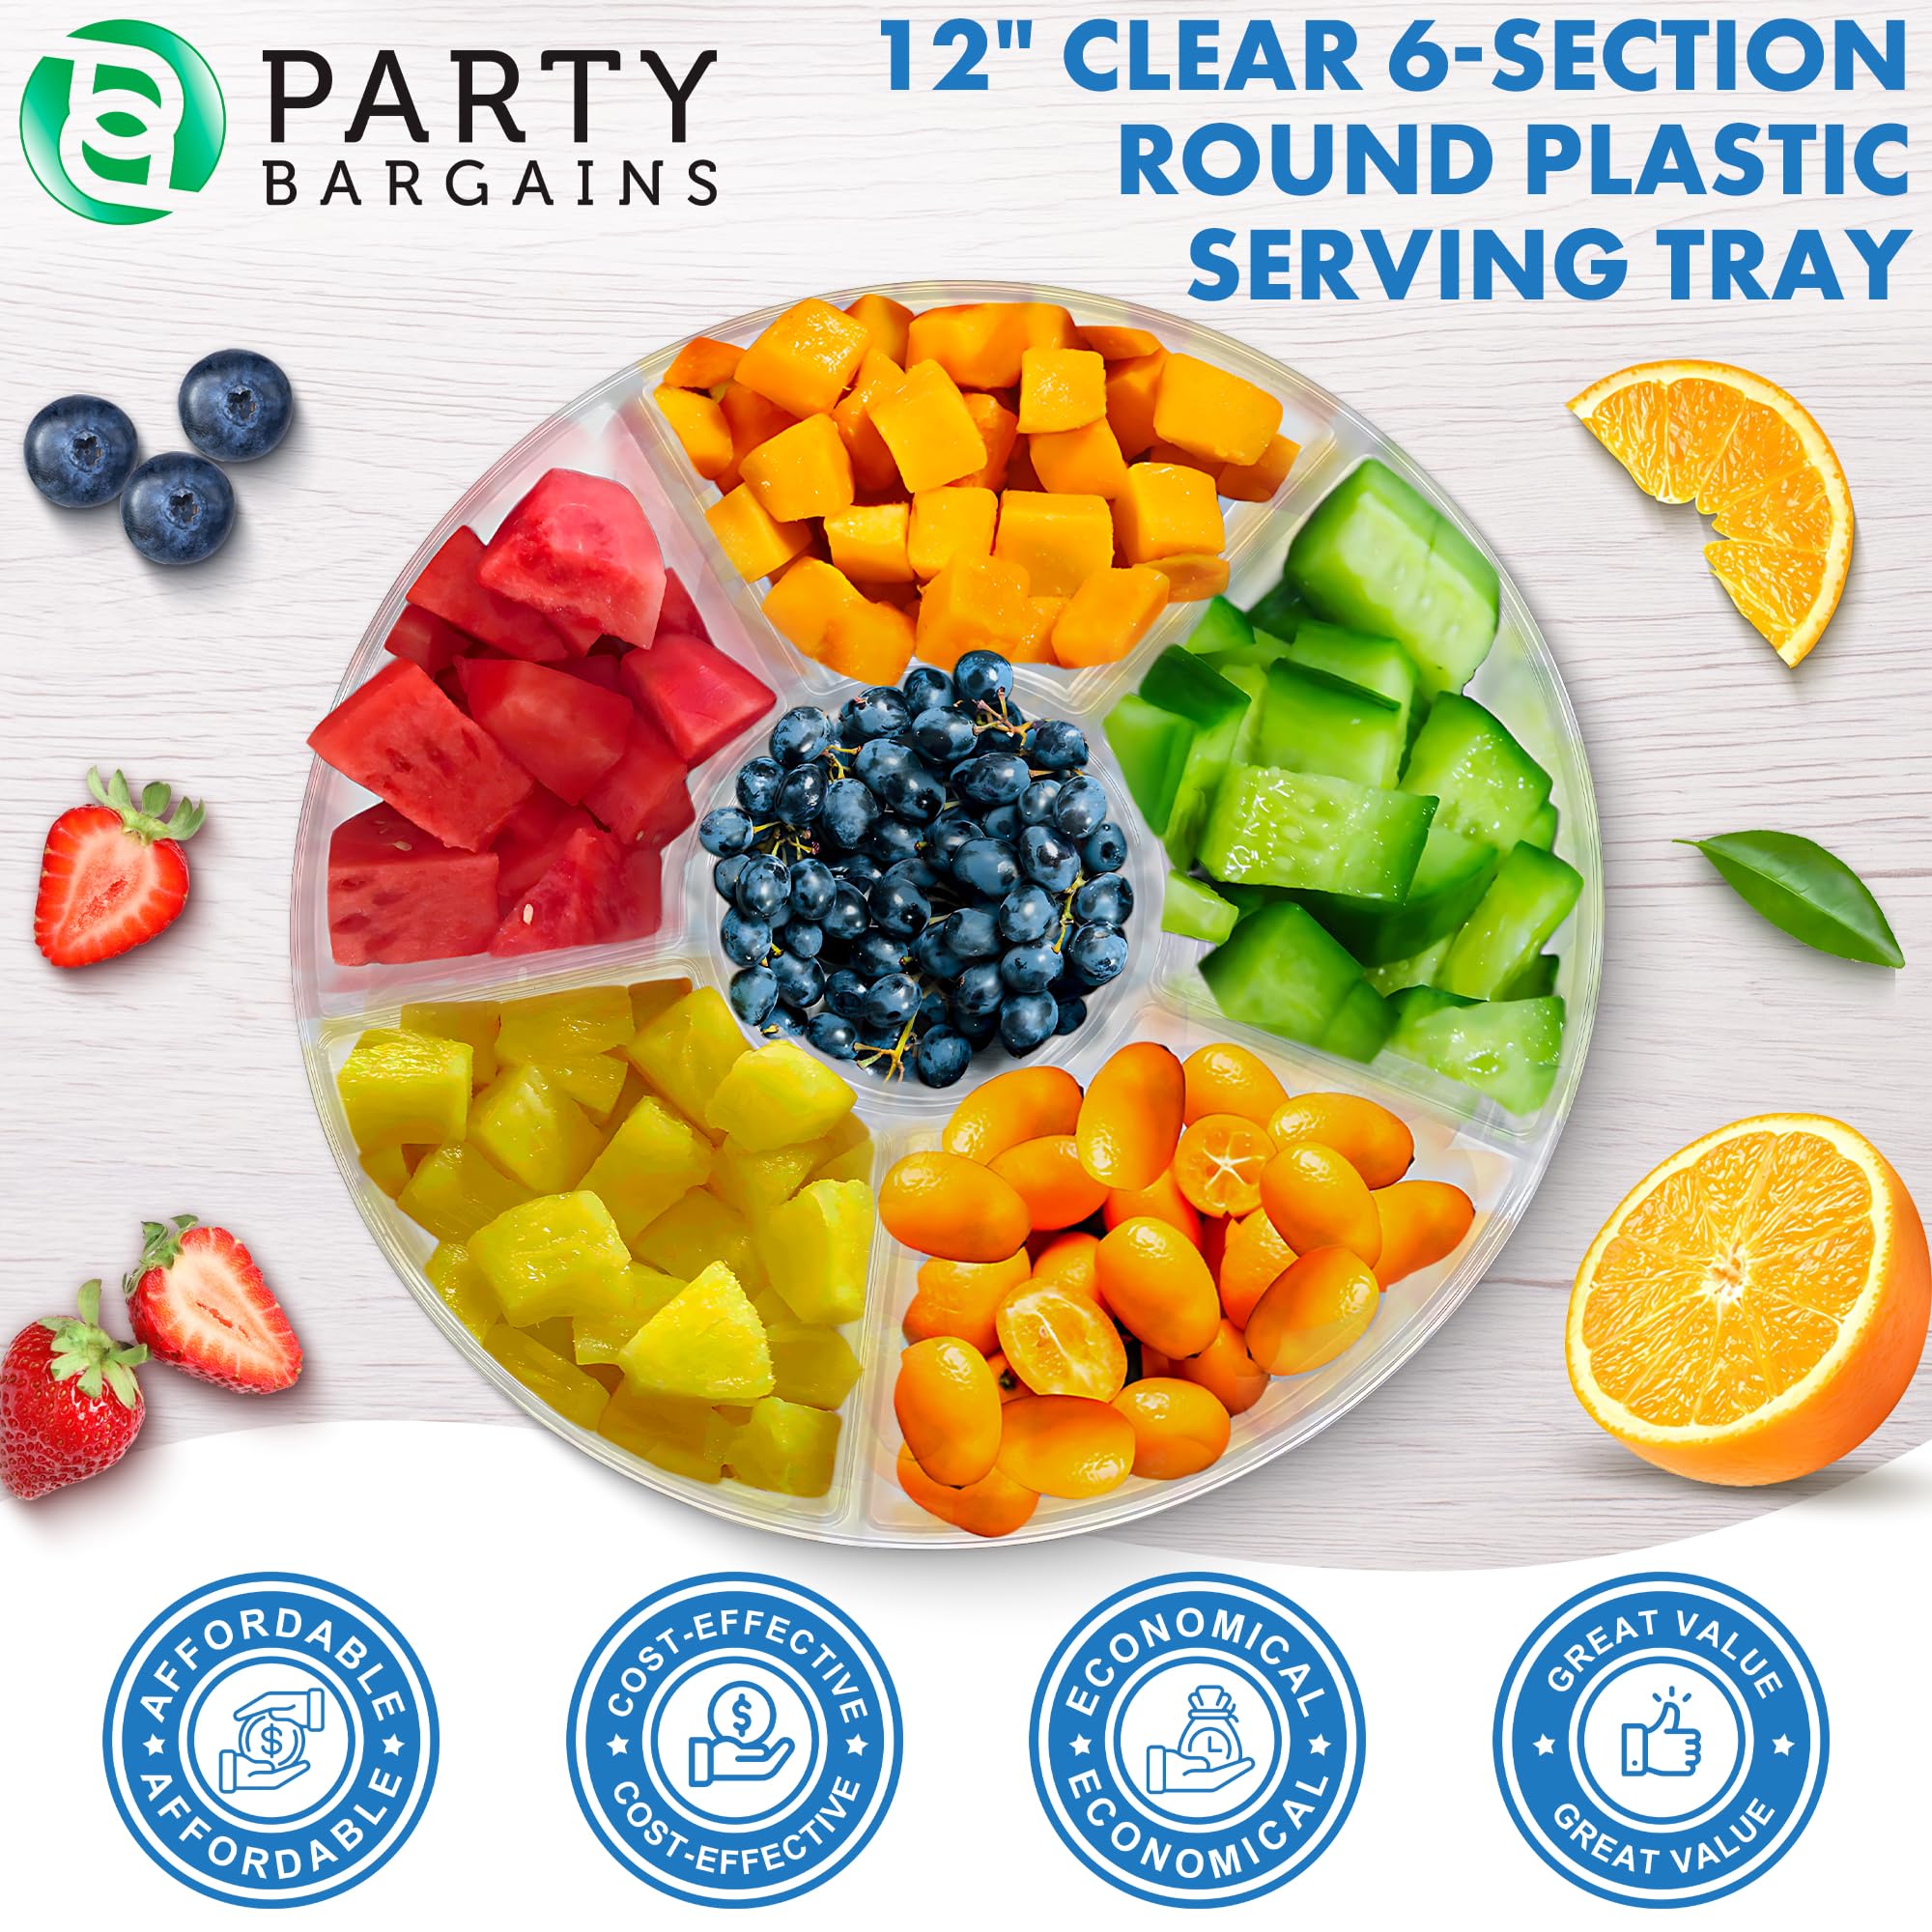 PARTY BARGAINS 12" Round Plastic Serving Tray, 6-Sections, Clear, Pack of 4